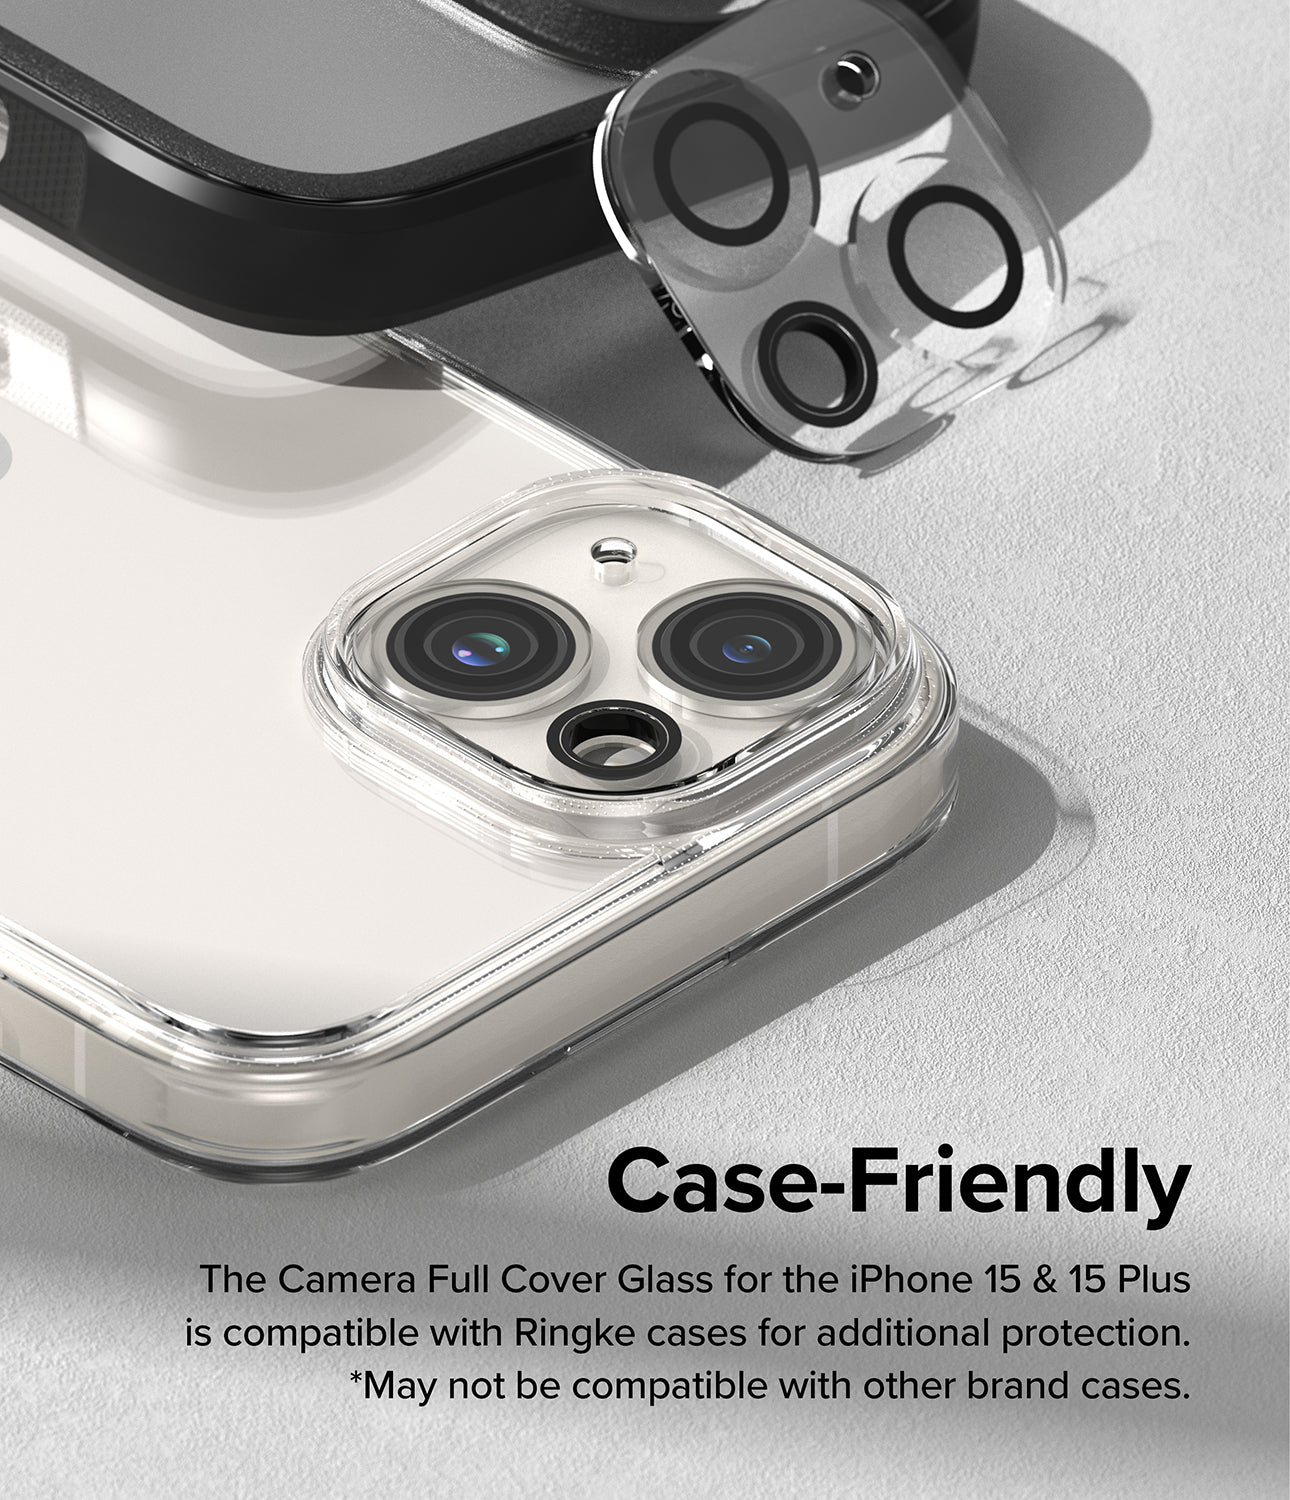 iPhone 15 Plus / 15 | Camera Protector Glass [2 Pack] - Case Friendly. The Camera Full Cover Glass for the iPhone 15 and 15 Plus is compatible with Ringke cases for additional protection. May not be compatible with other brand cases.